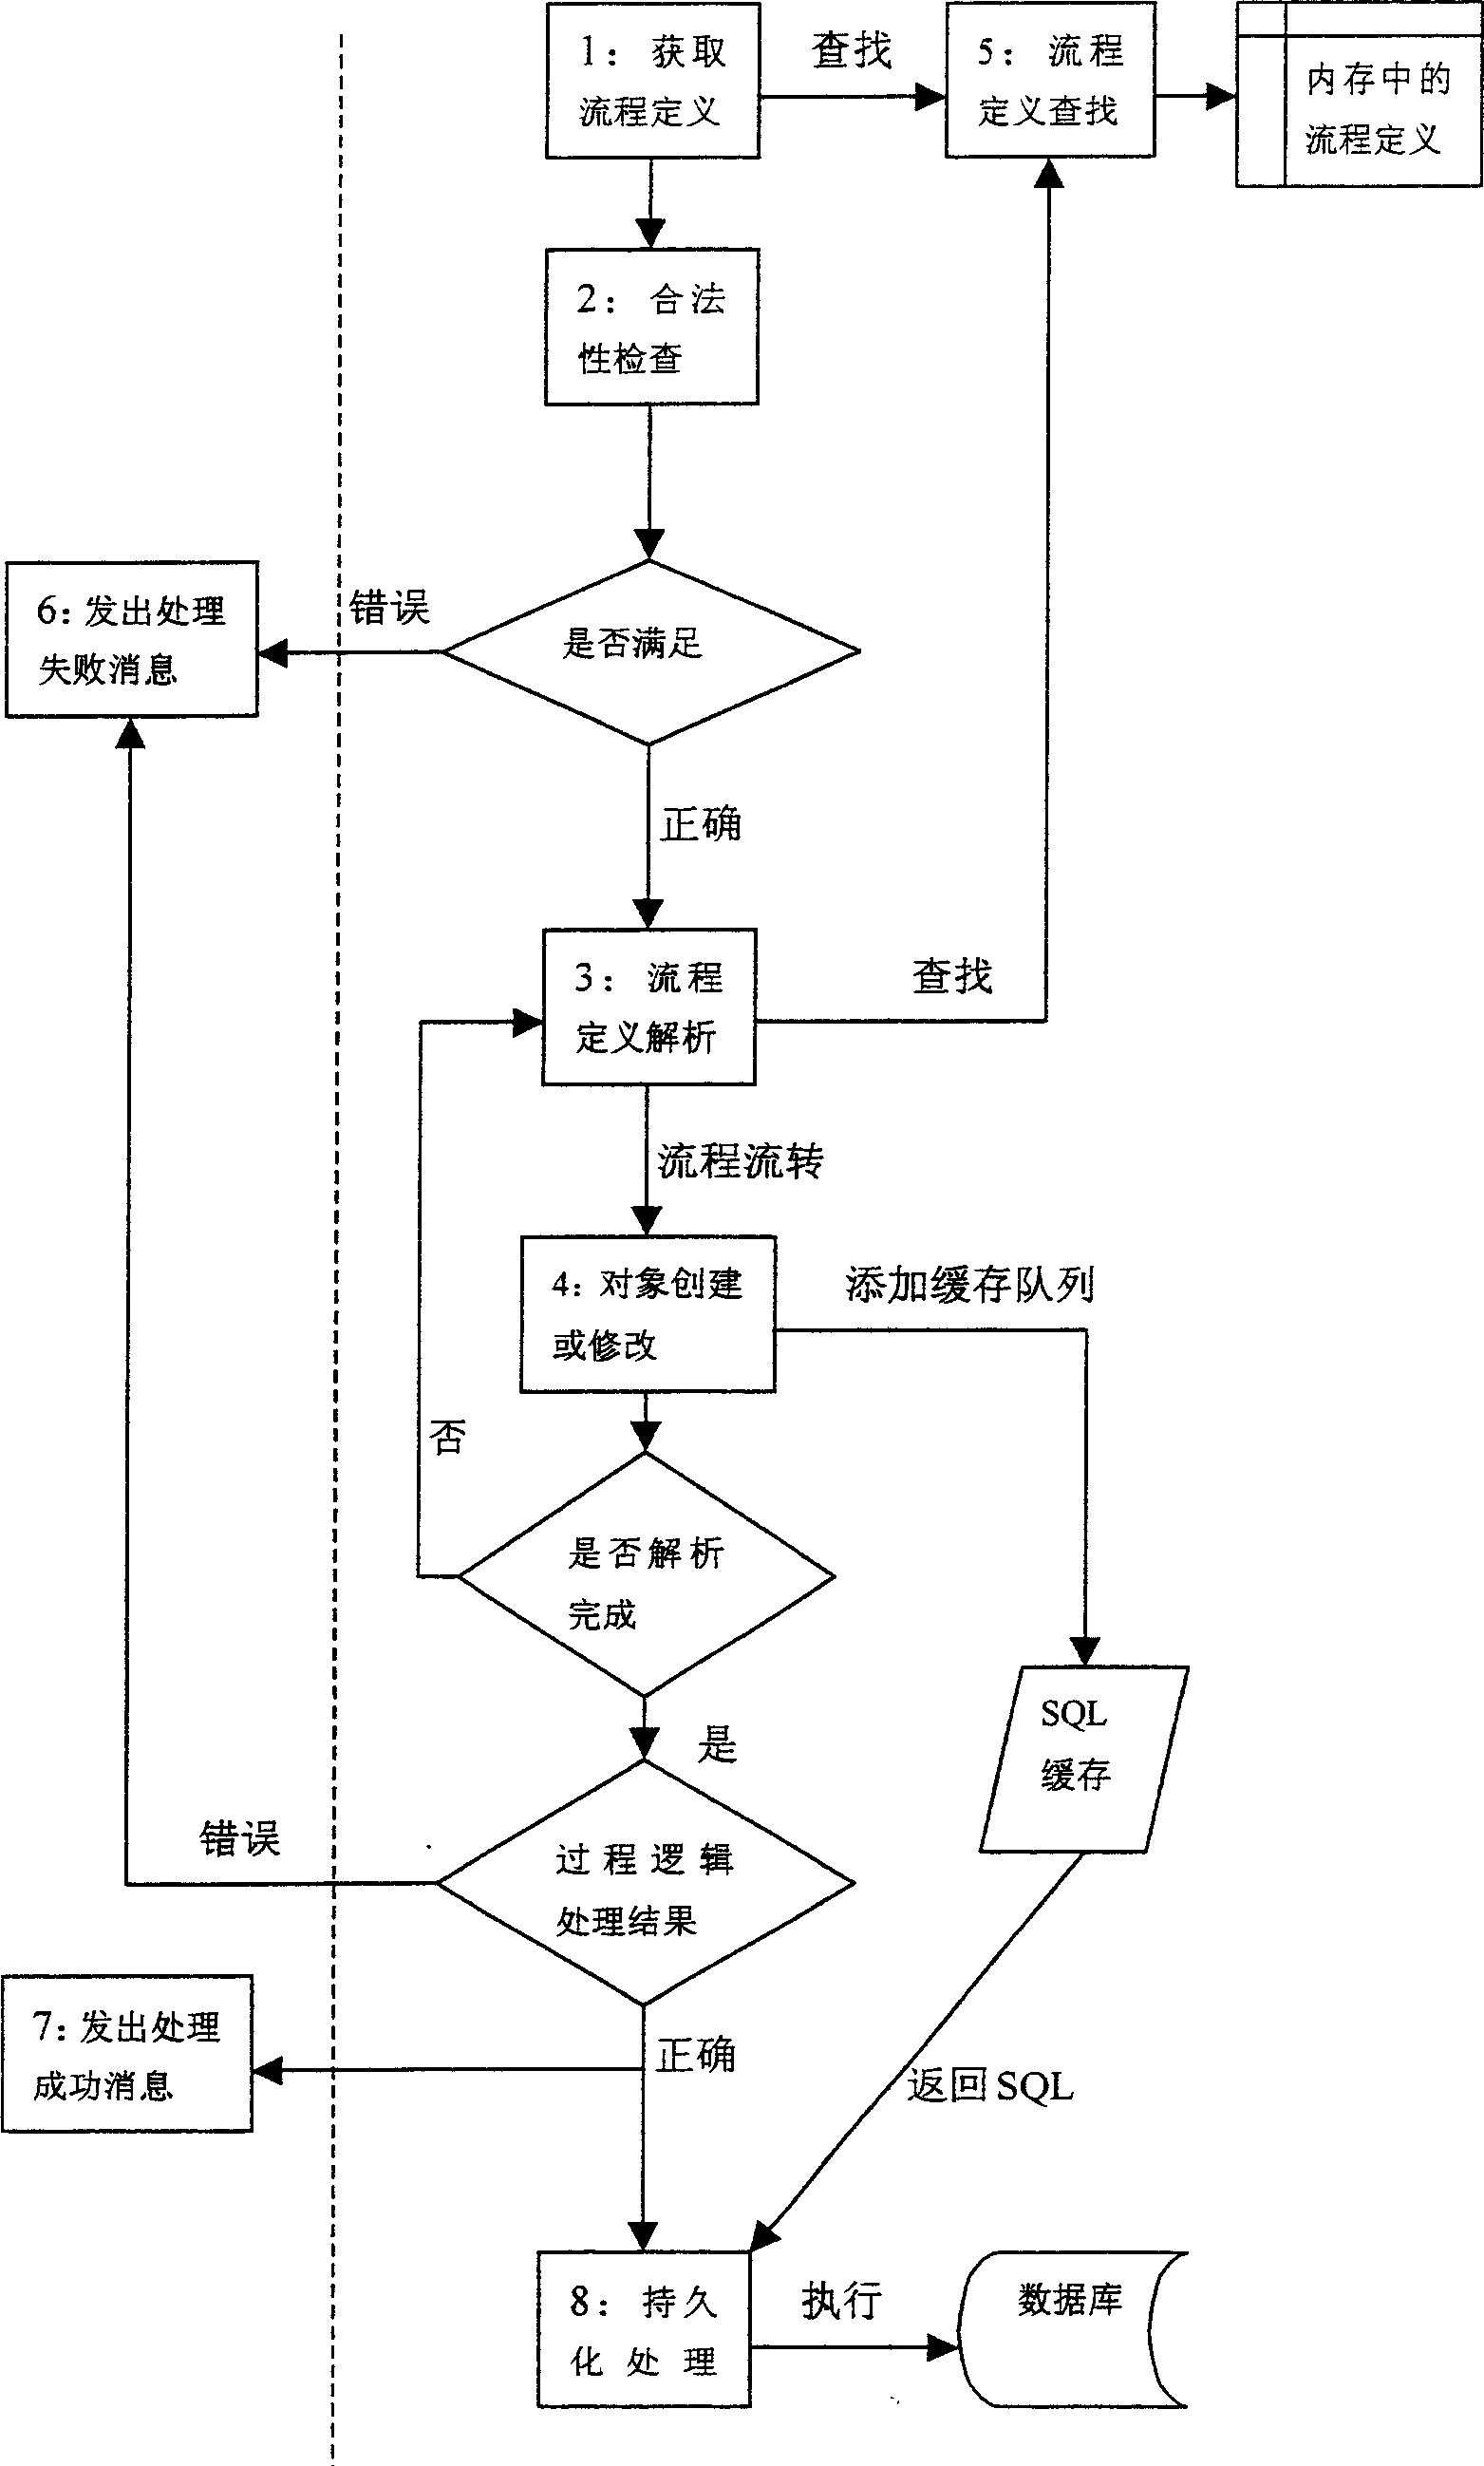 High-efficient processing method of working-fluid engine